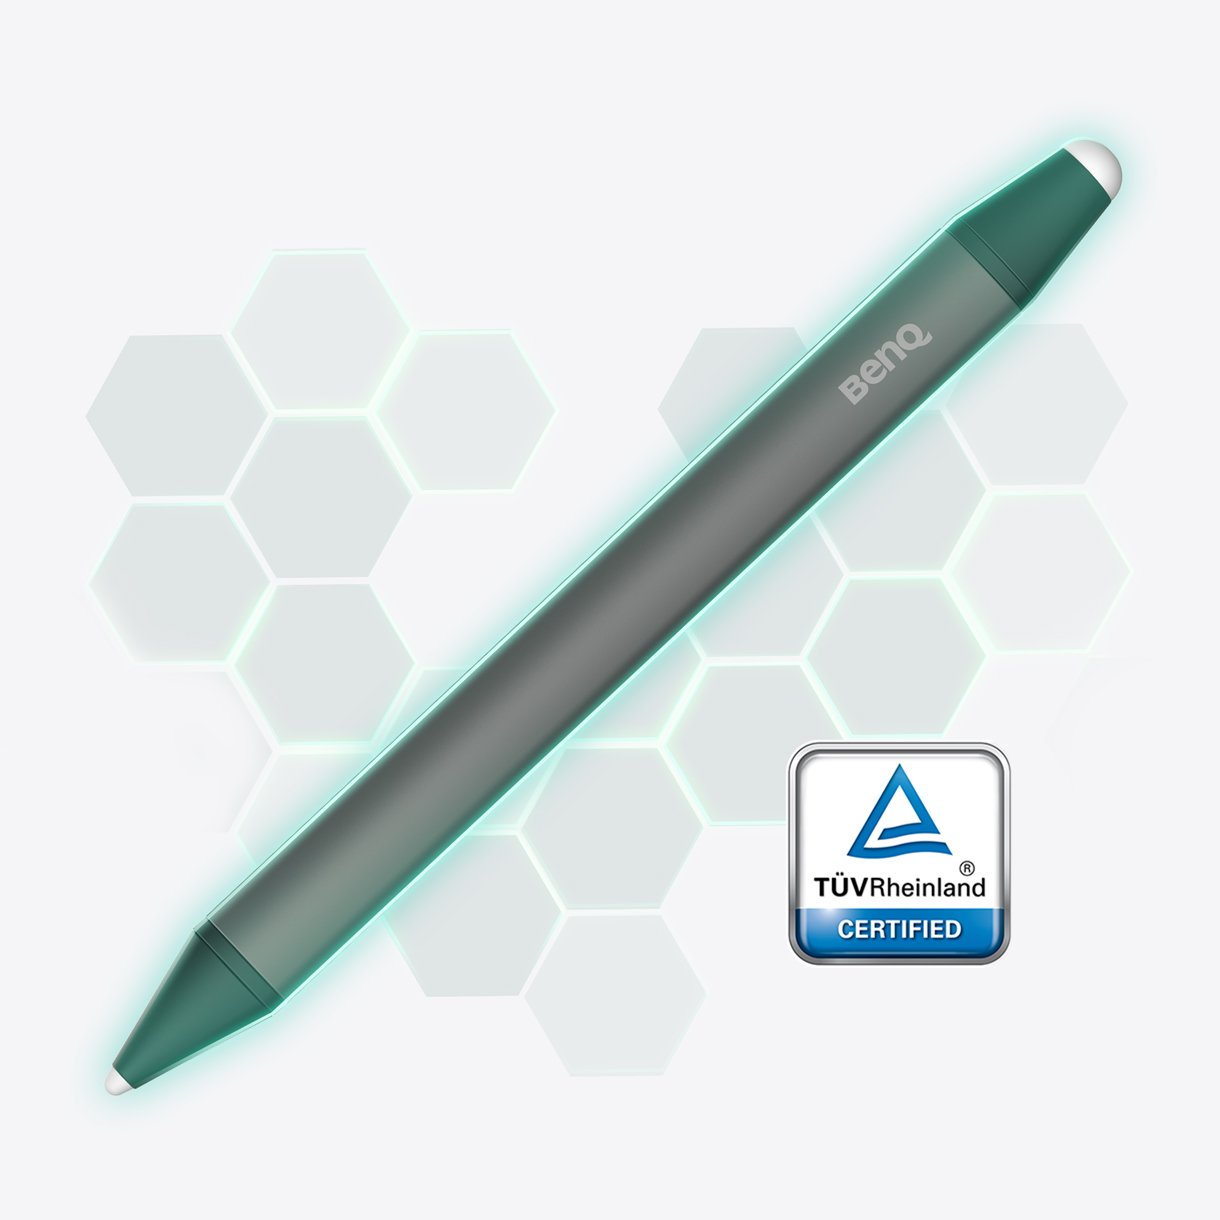 Pen with germ-resistent shield and TUV logo